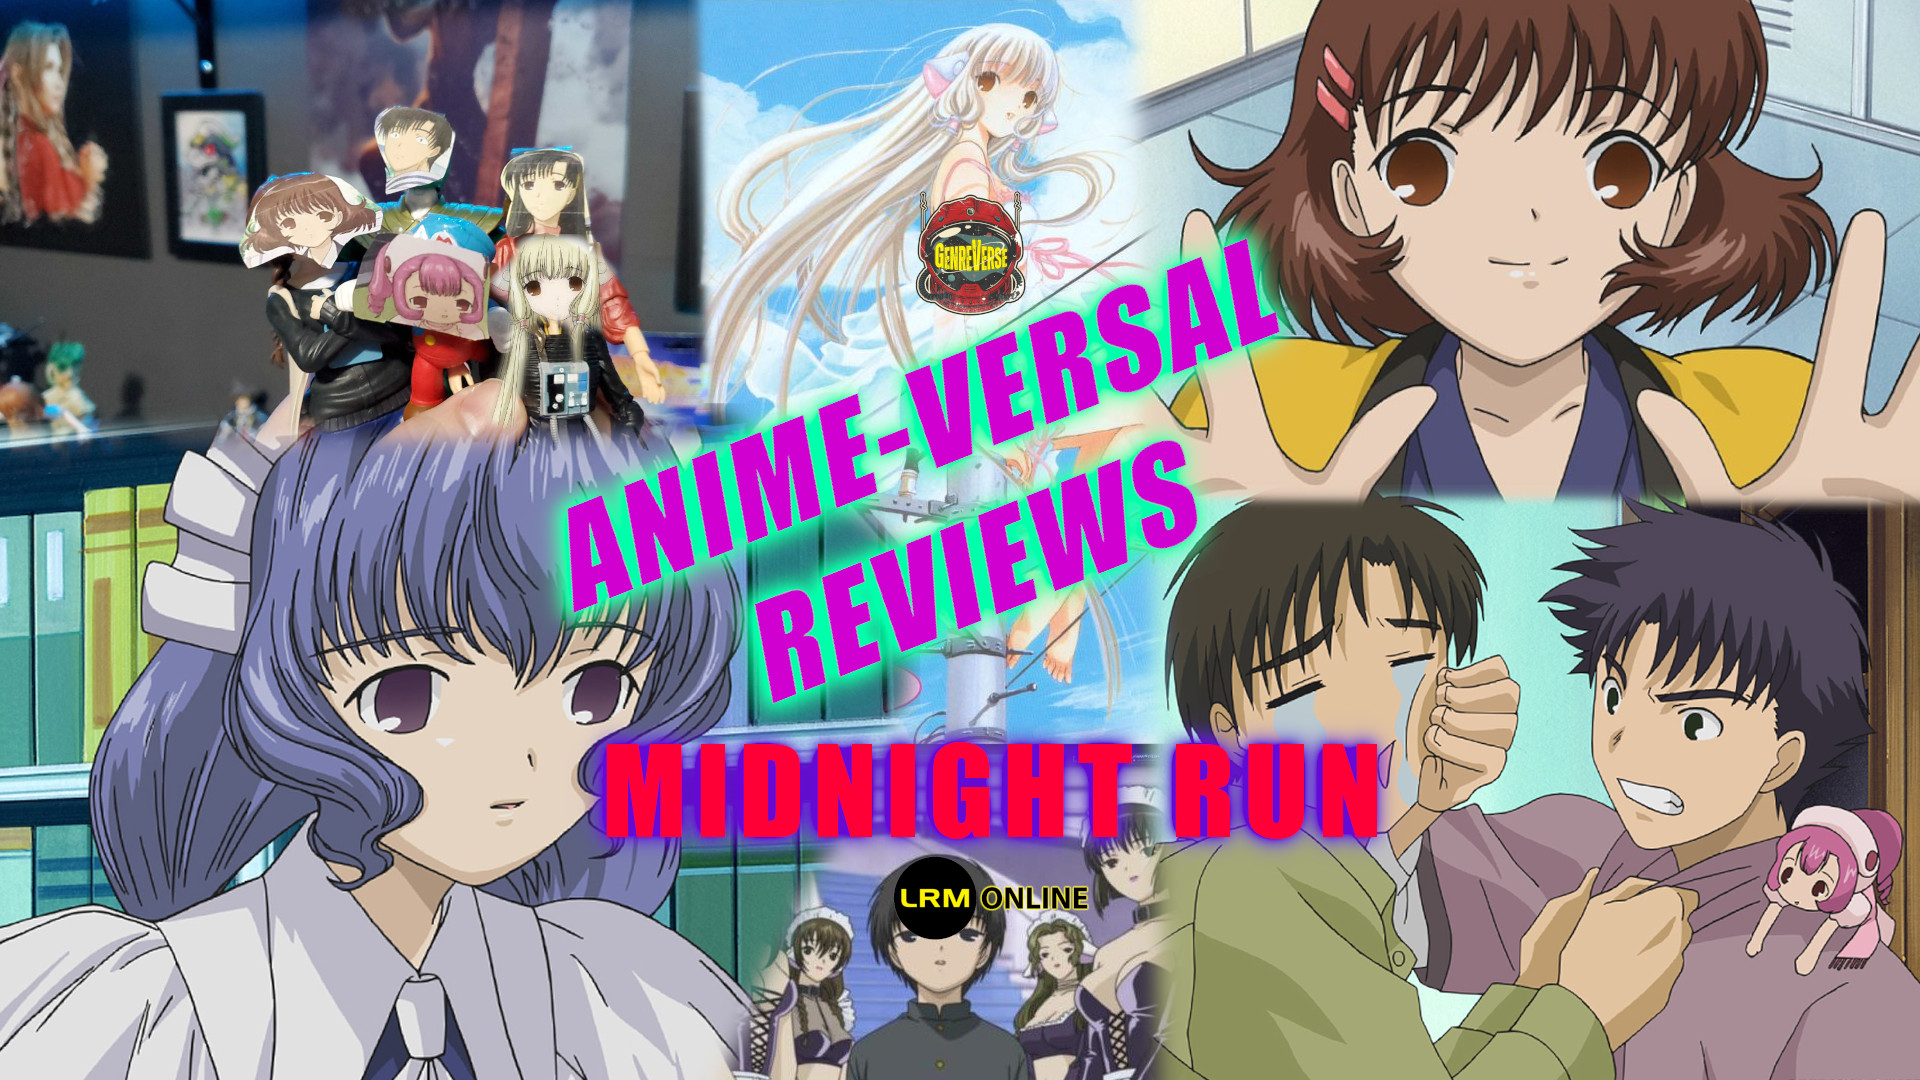 Chobits Review- A Poorly Translated Anime, But The Hilariously Wholesome Dirtiness Makes It Worth It | AVR: Midnight Run